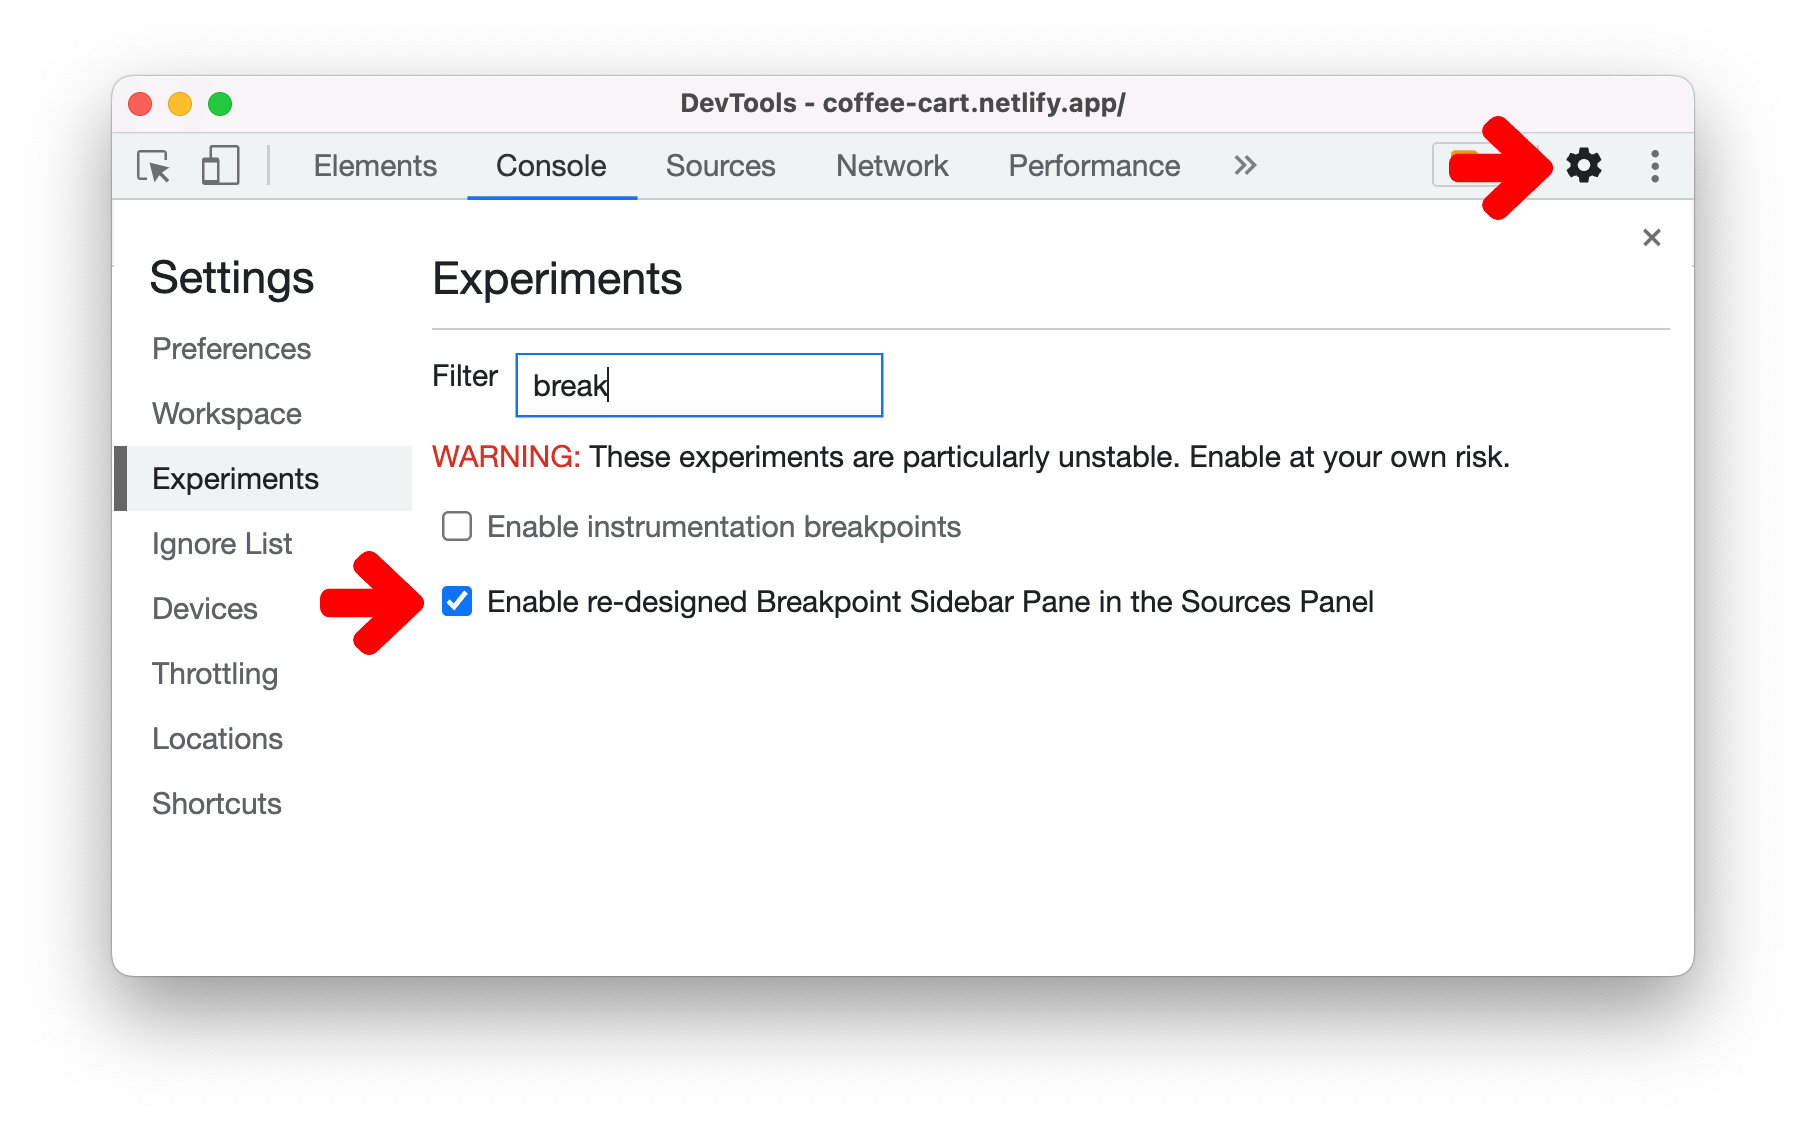 Enable breakpoint redesign experiment